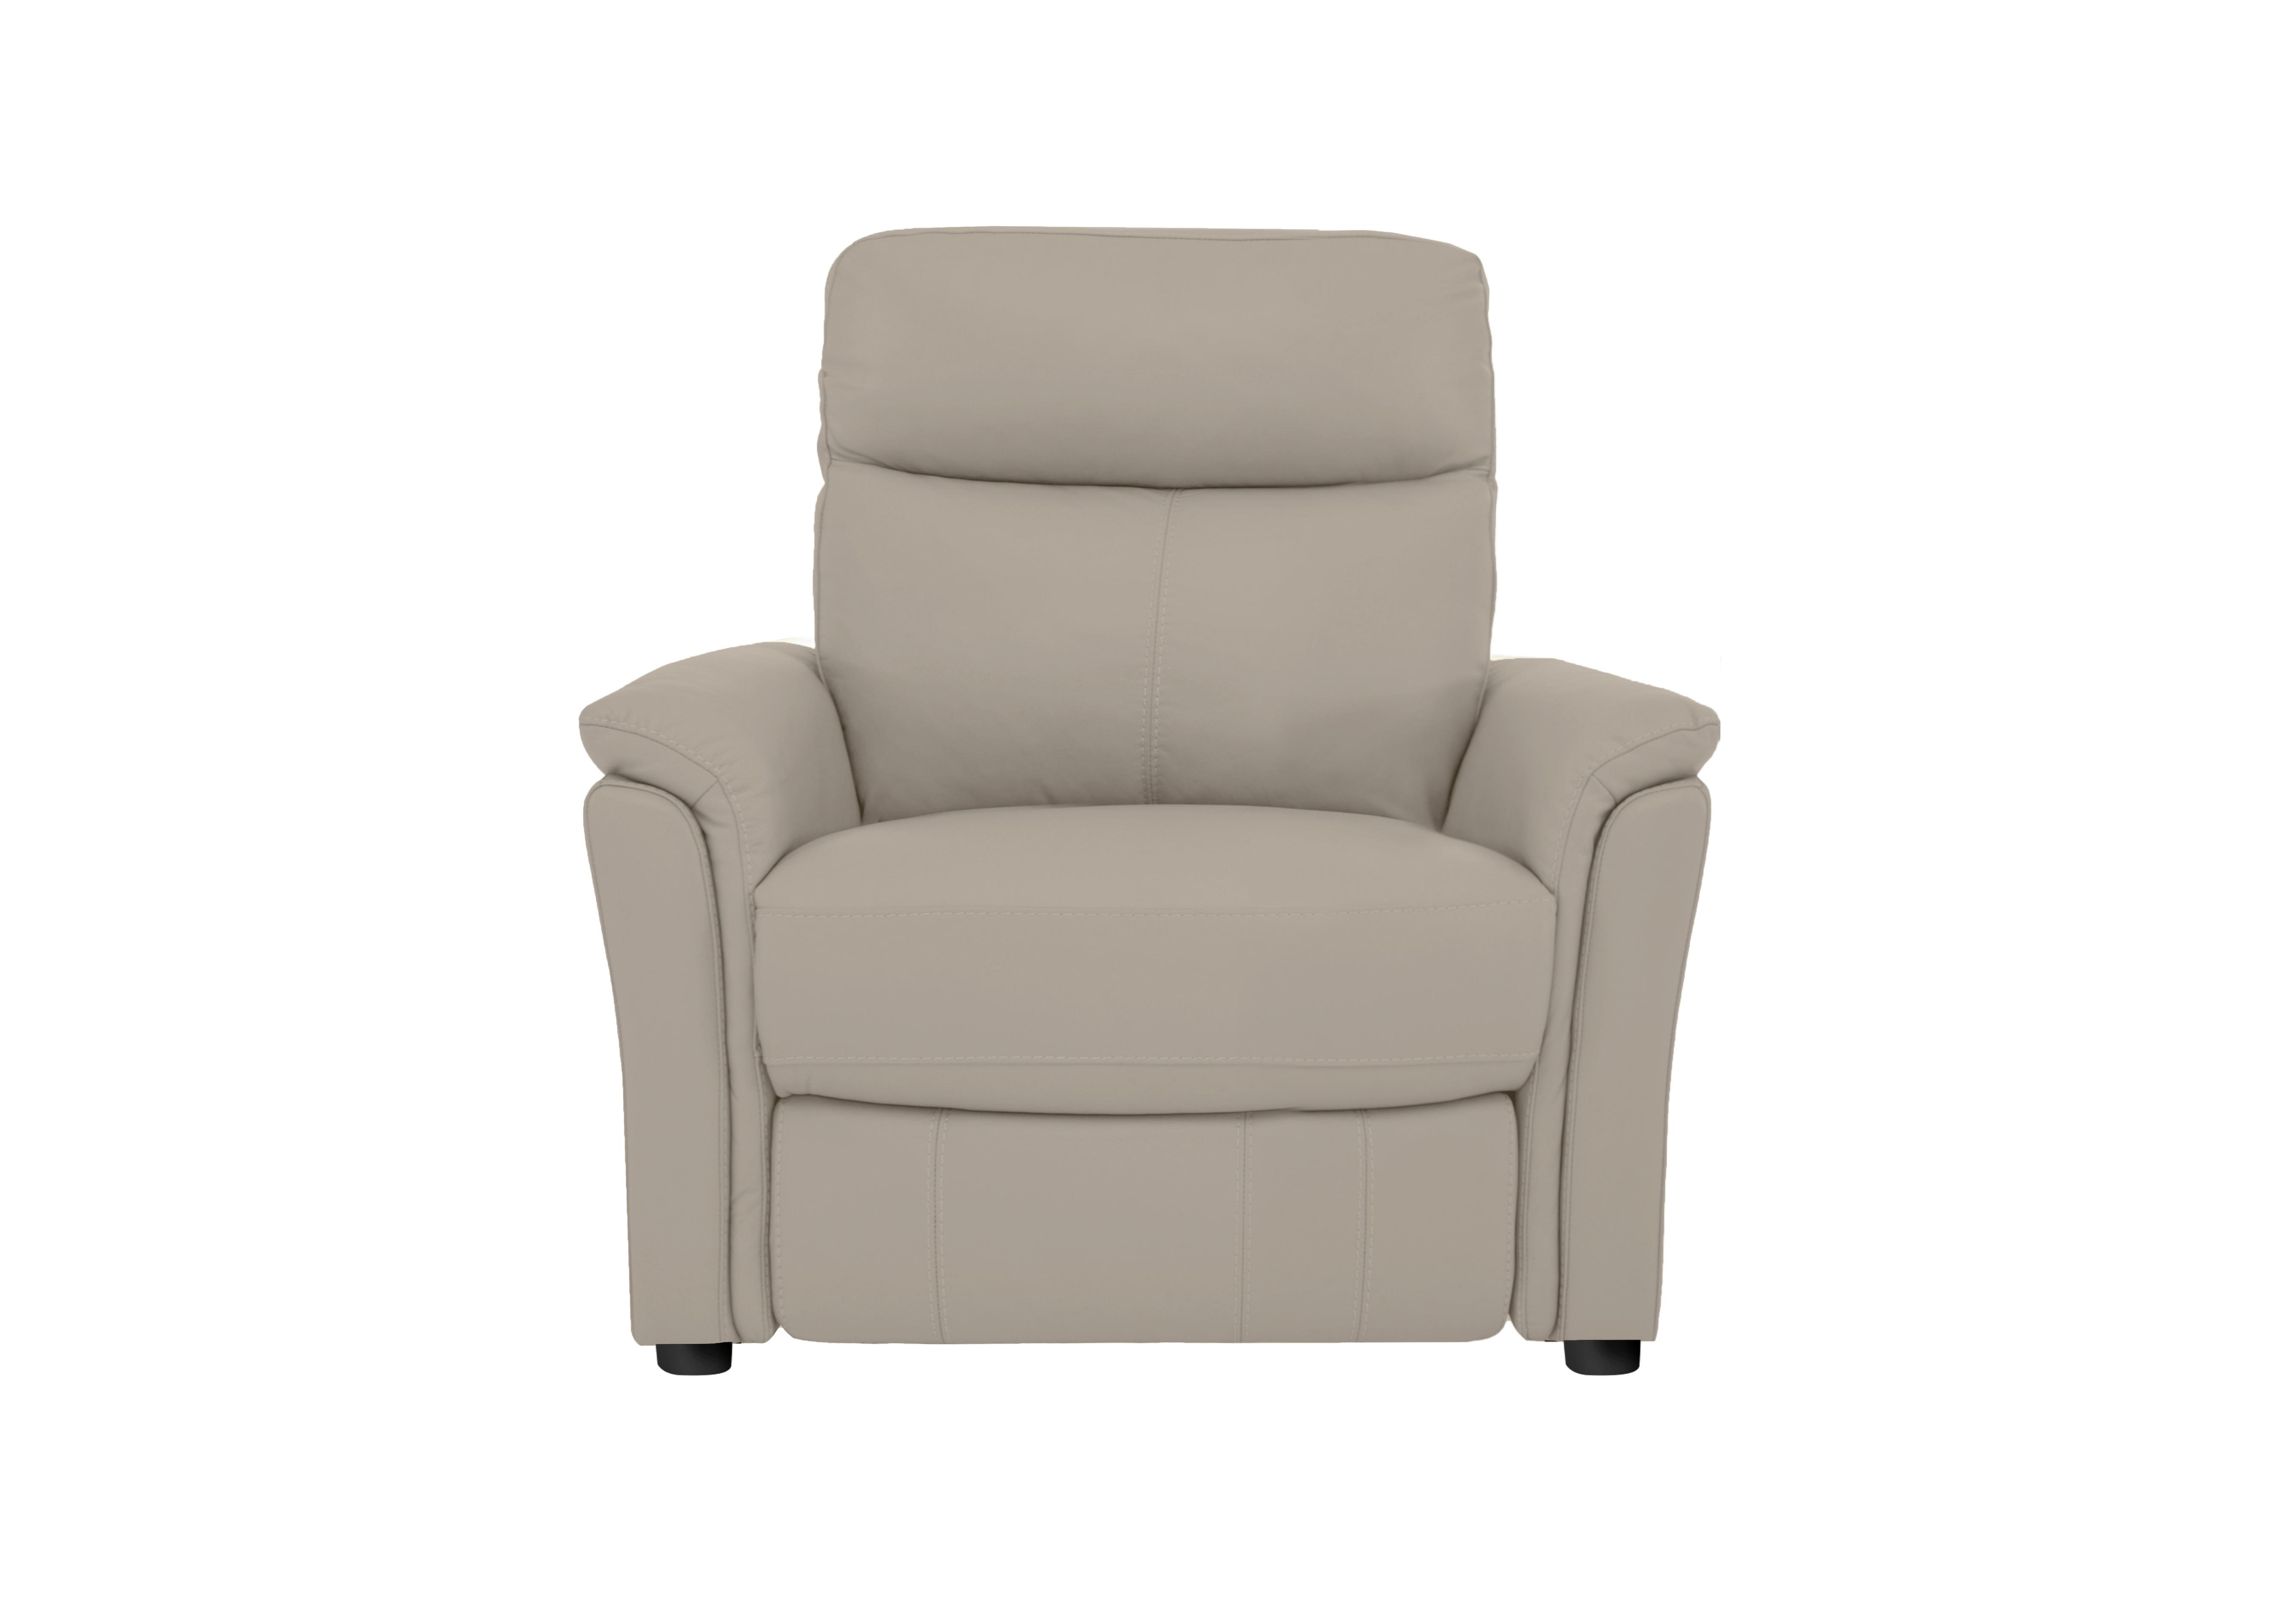 Compact Collection Piccolo Leather Static Armchair in Bv-946b Silver Grey on Furniture Village